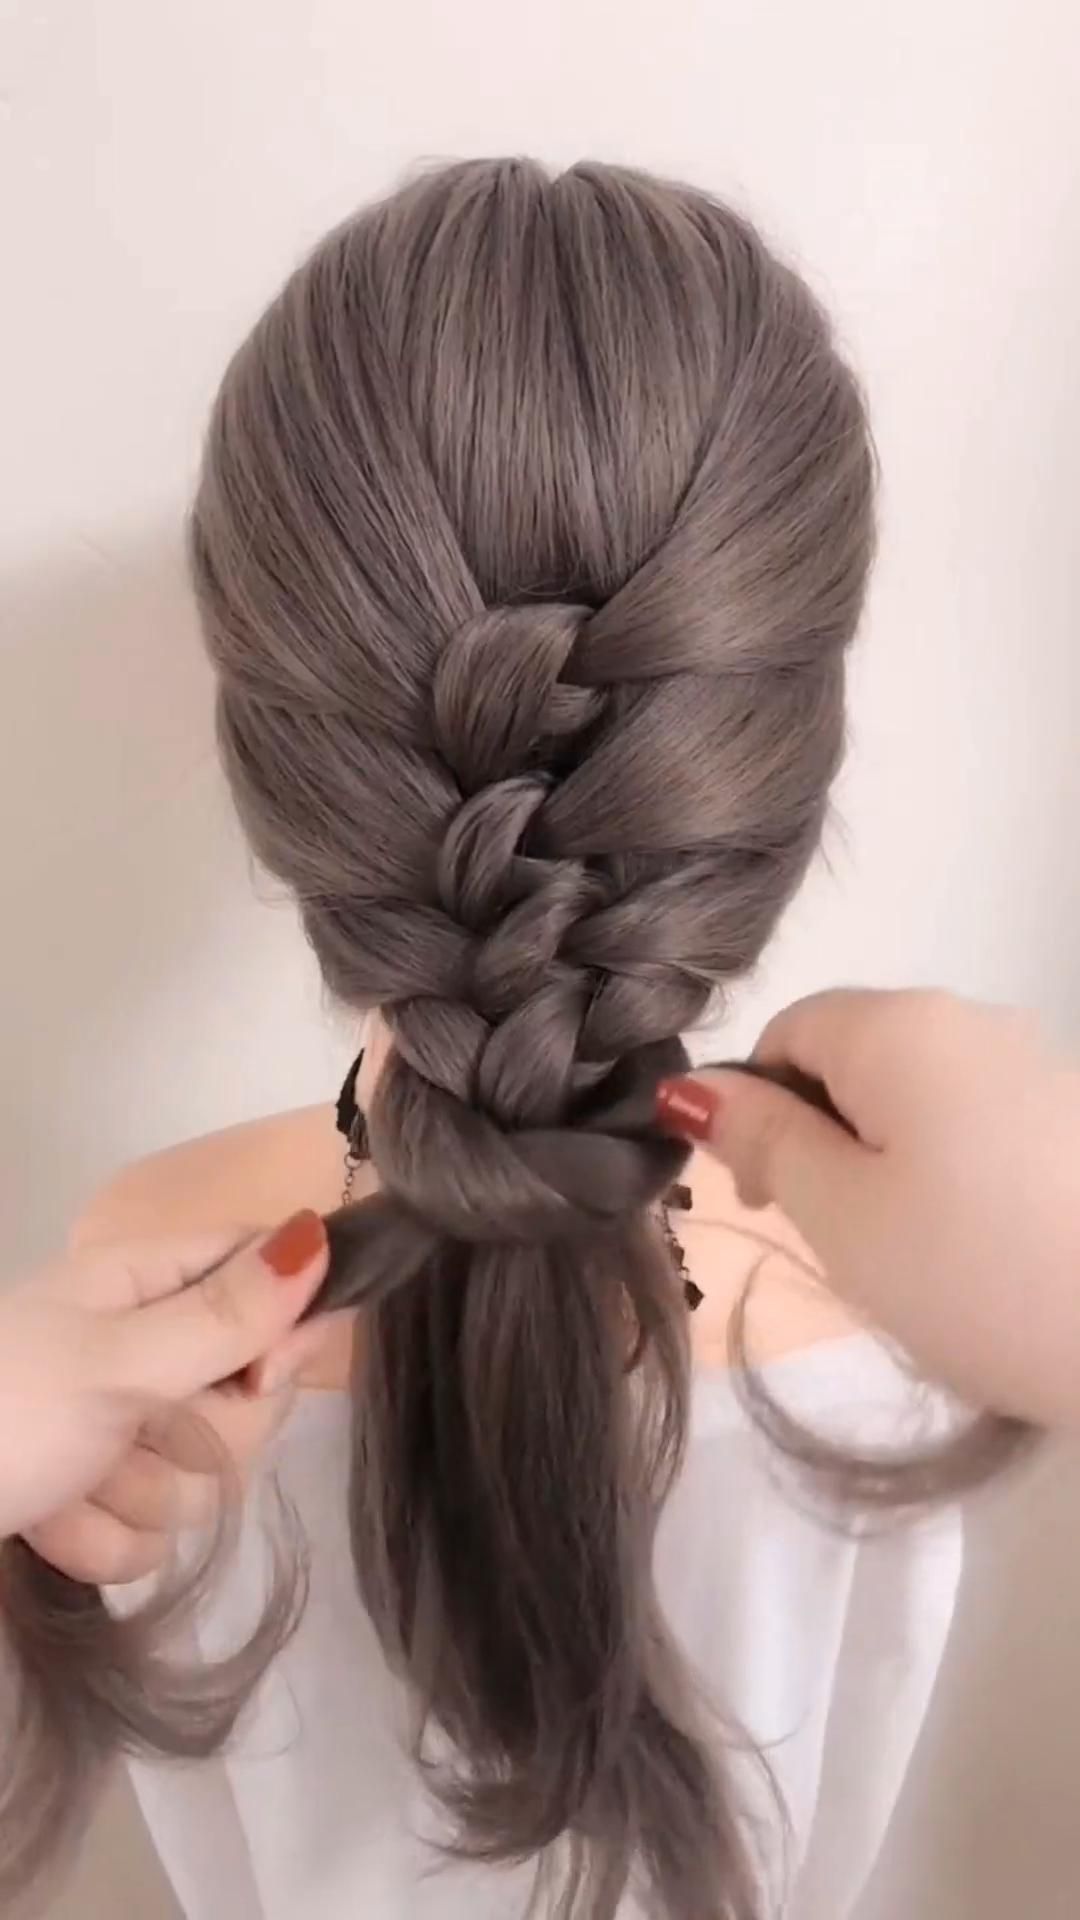 Braids, Buns, and Twists Step by Step Hairstyle Tutorials -   16 hairstyles Step By Step updo ideas